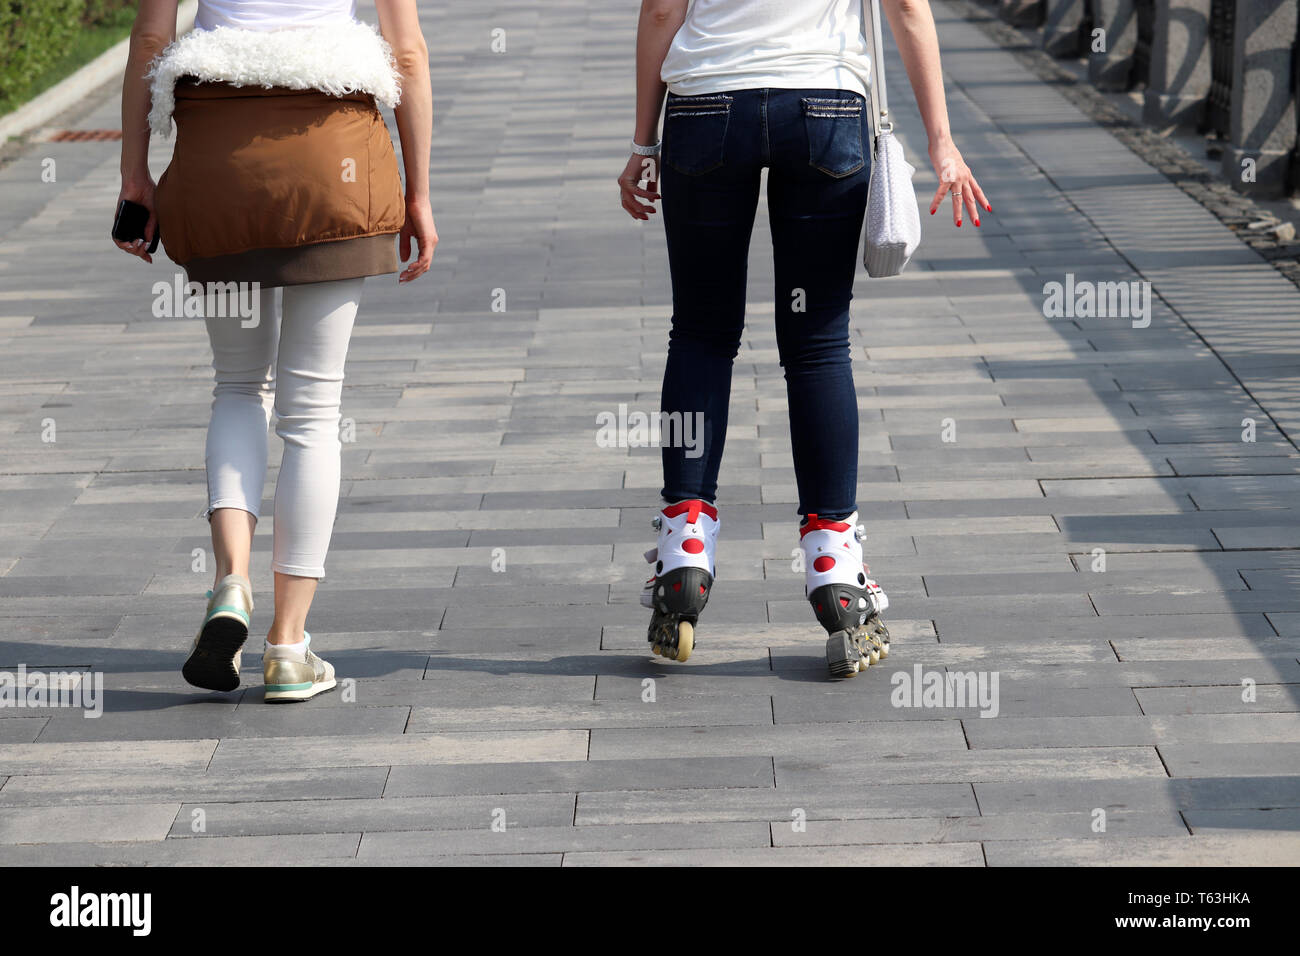 Riding on roller skates, two girls walking on the street. Concept of youth, sport, lifestyle Stock Photo